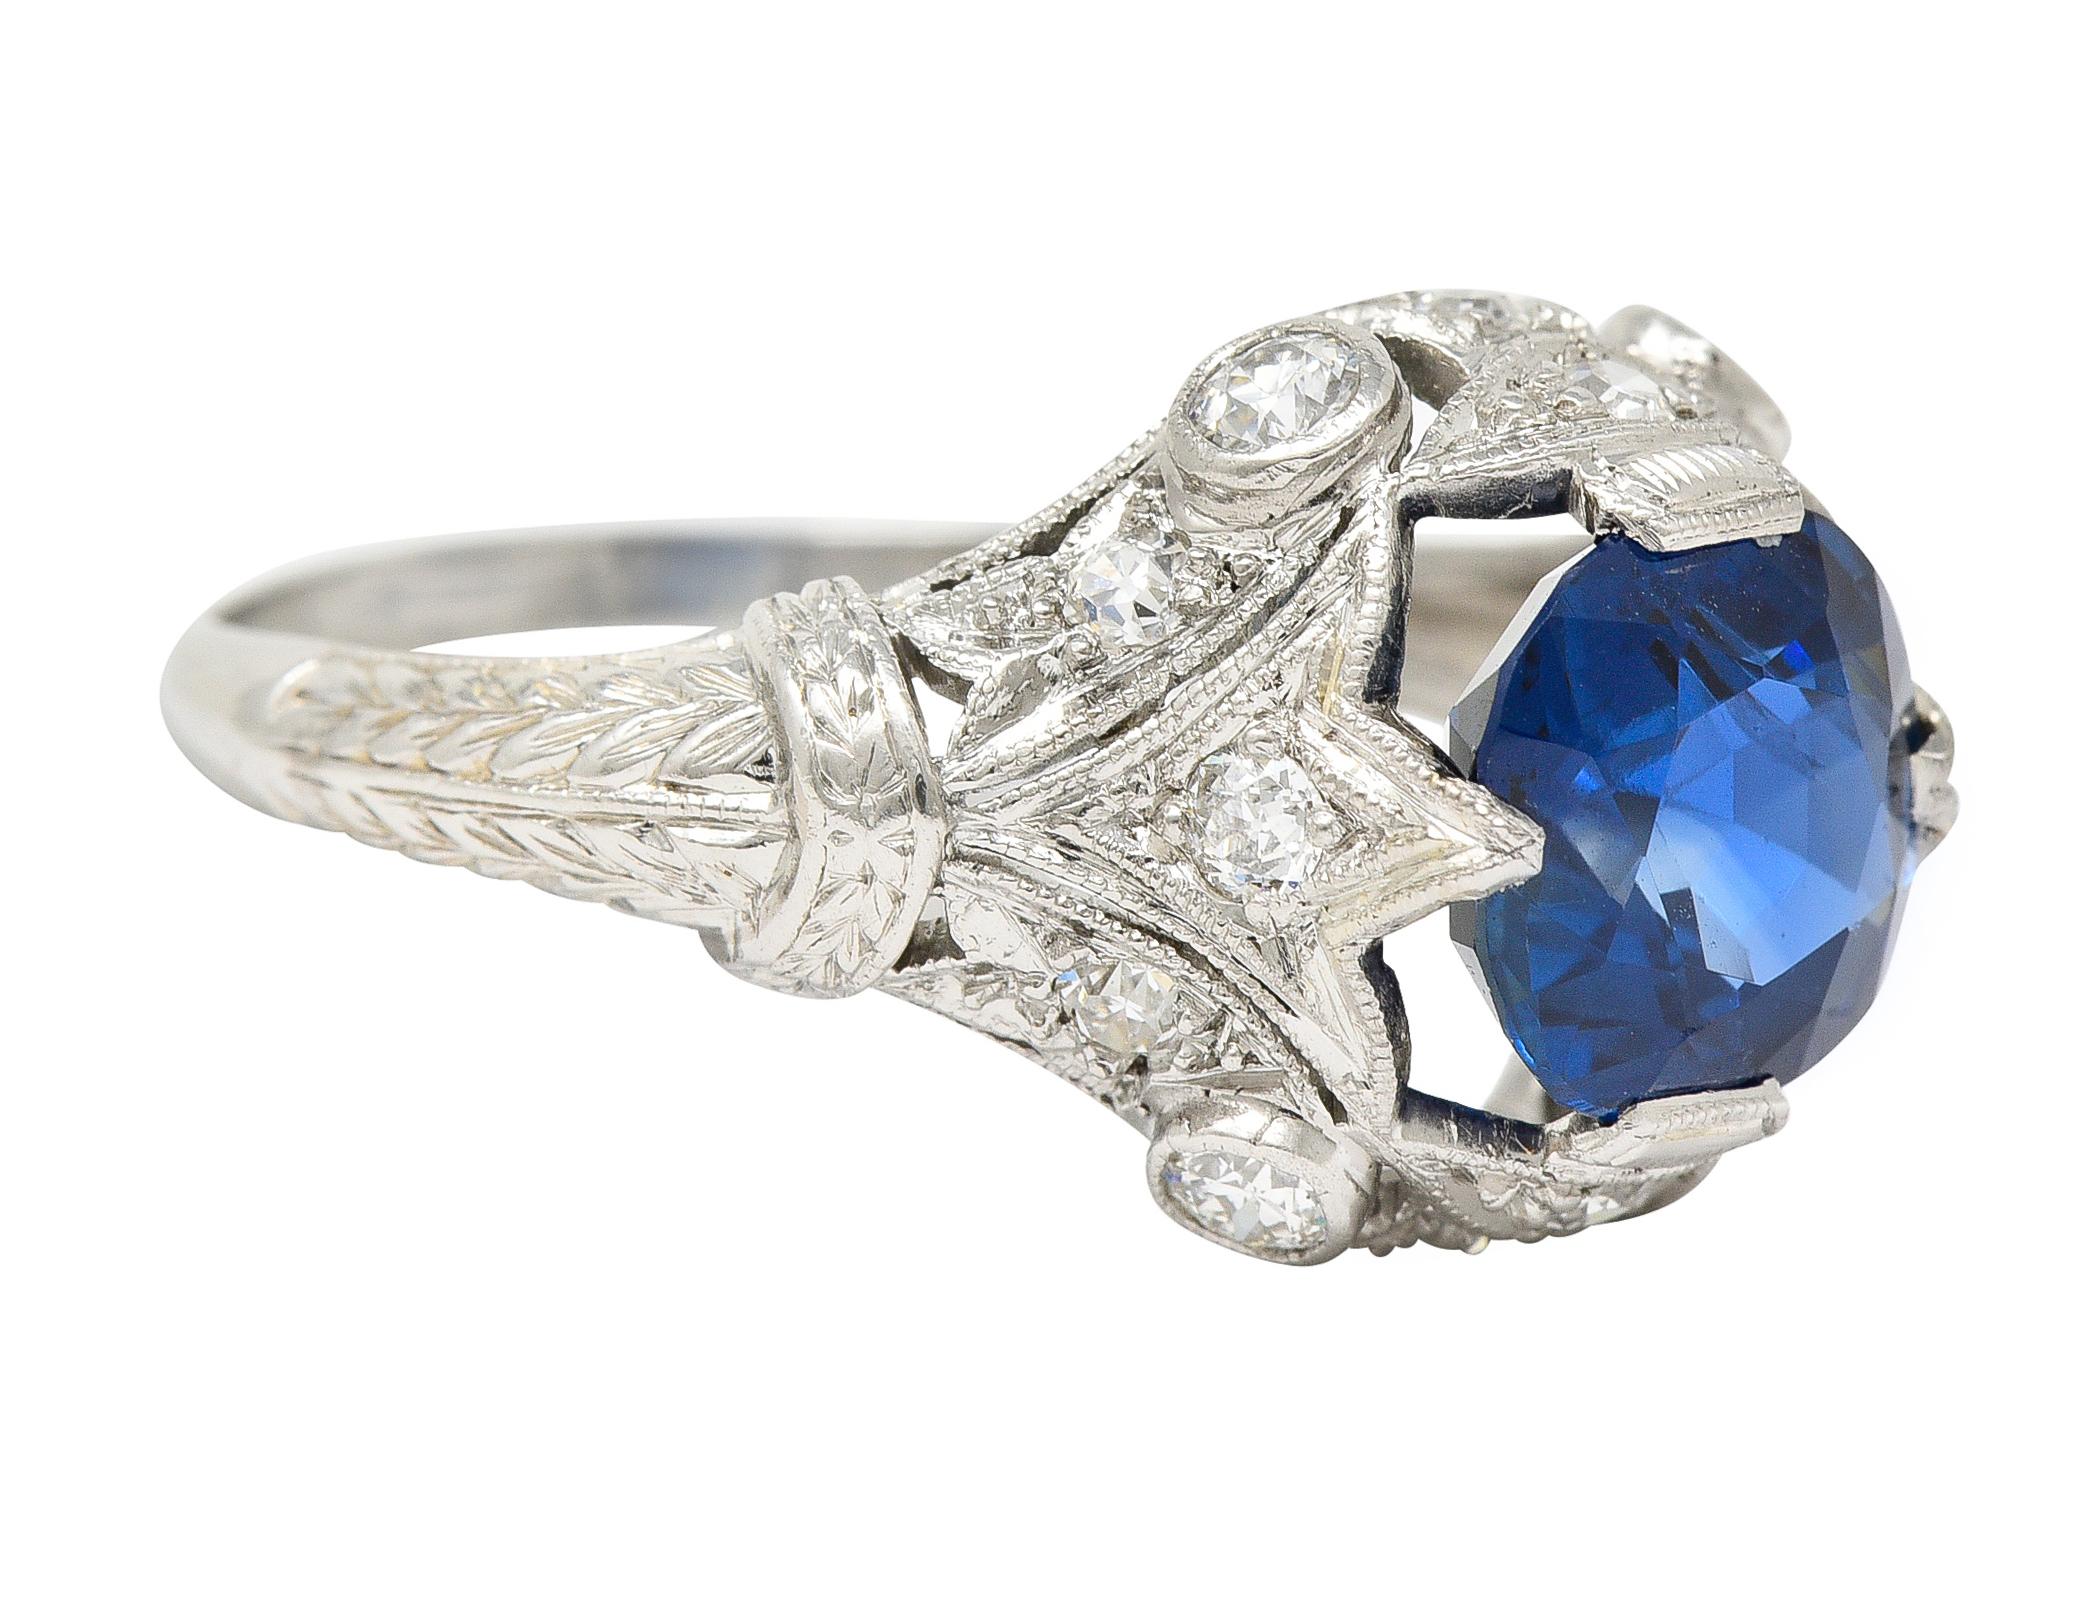 Centering a cushion cut sapphire weighing 2.61 carats total - transparent medium blue. Natural Cambodian in origin with no indications of heat treatment - set with tab prongs. Flanked by fleur-de-lis motif shoulders and decorus surround. Accented by